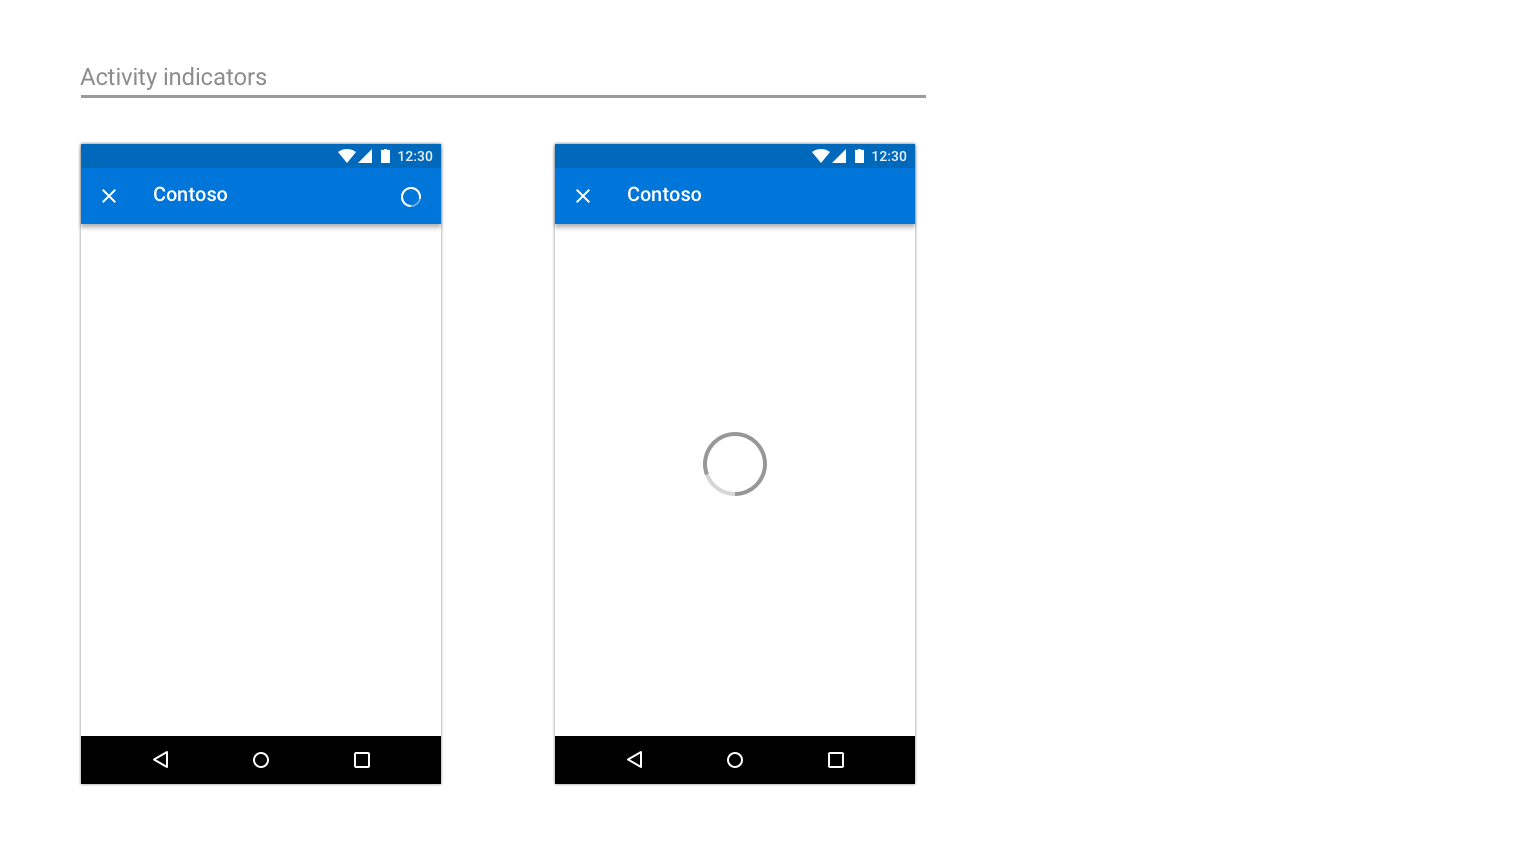 Examples of a progress bar and an activity indicator on Android.